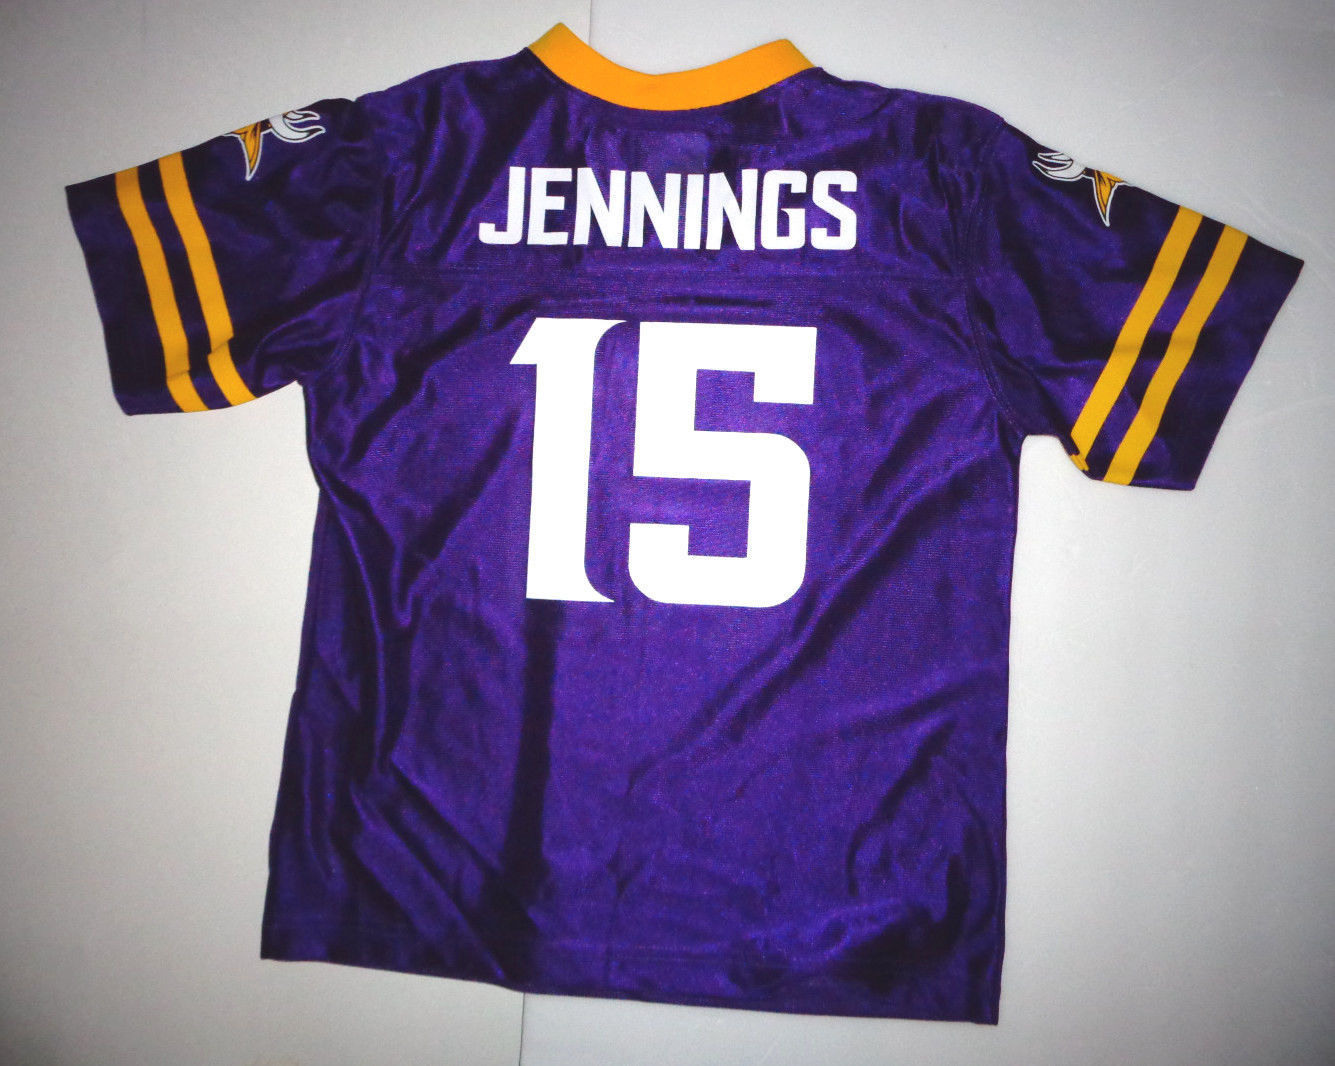 Primary image for NFL PLAYERS Minnesota Vikings #15 Greg Jennings jersey youth   NWT